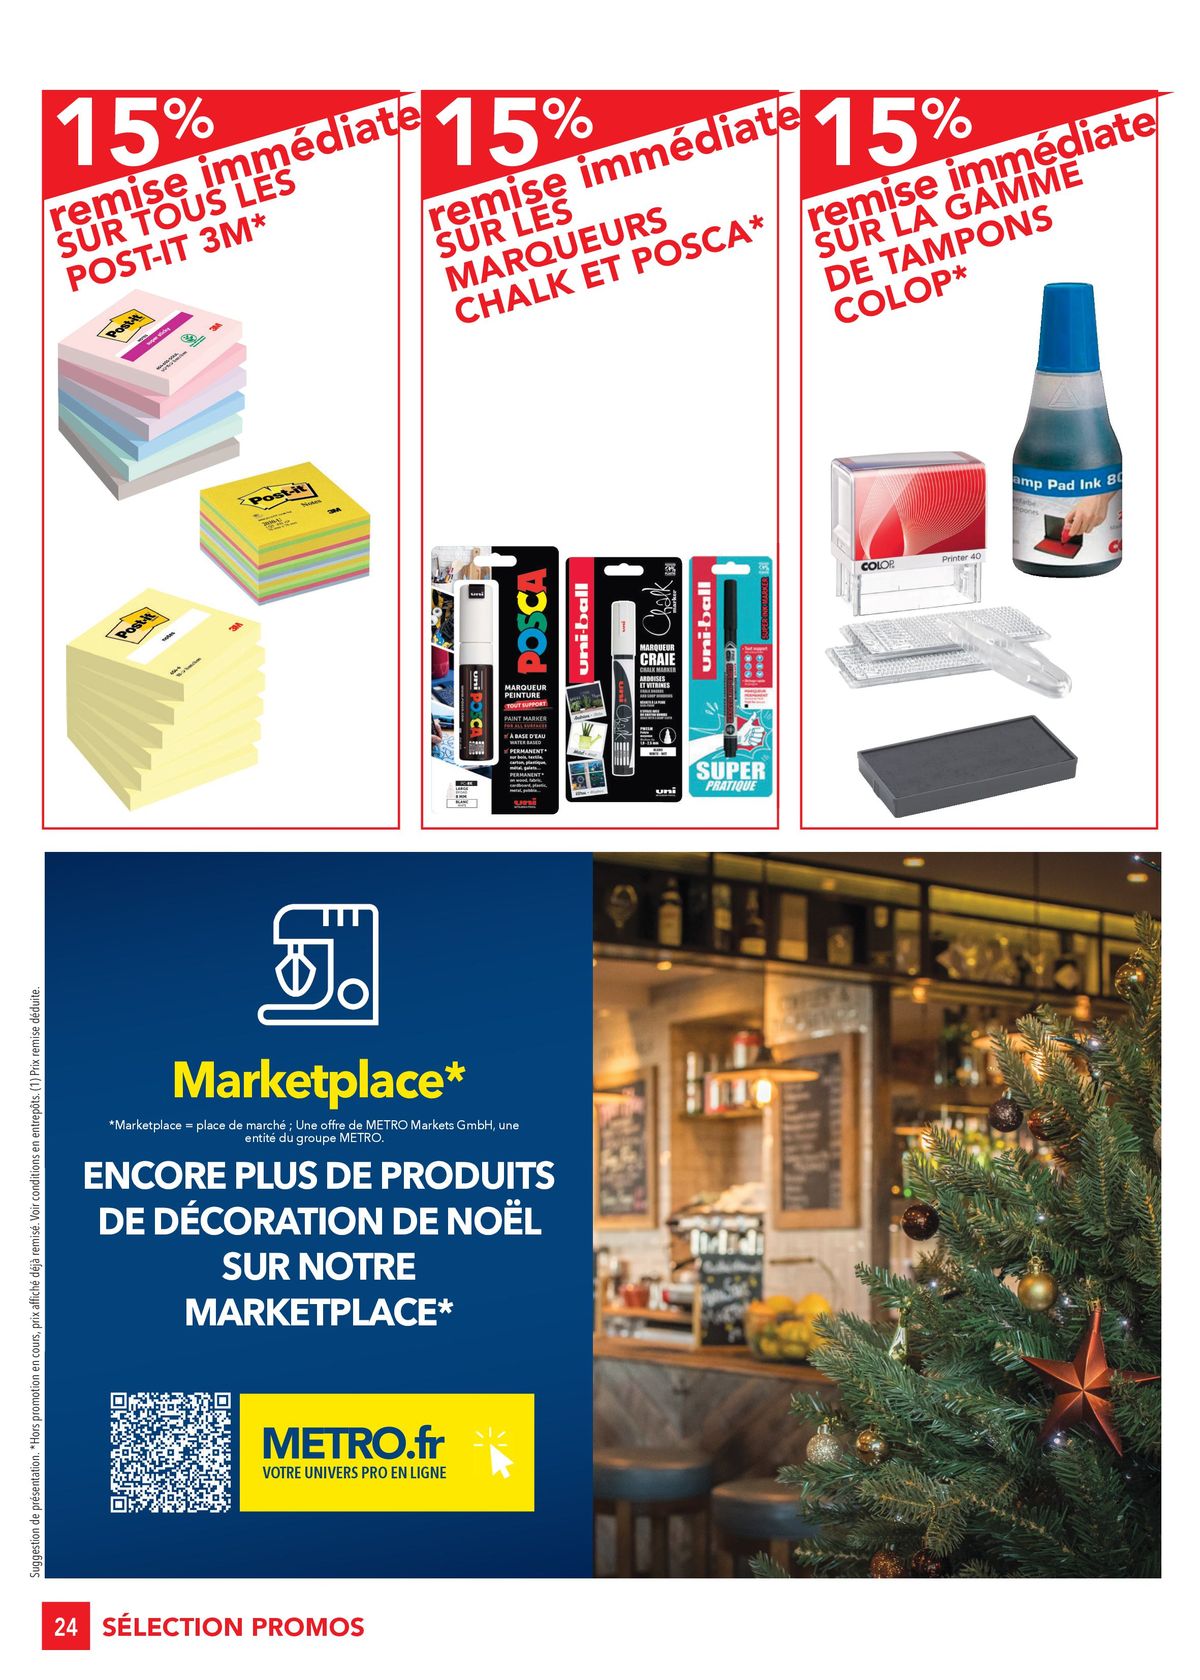 Catalogue SELECTION PROMO EQUIPEMENT, page 00024